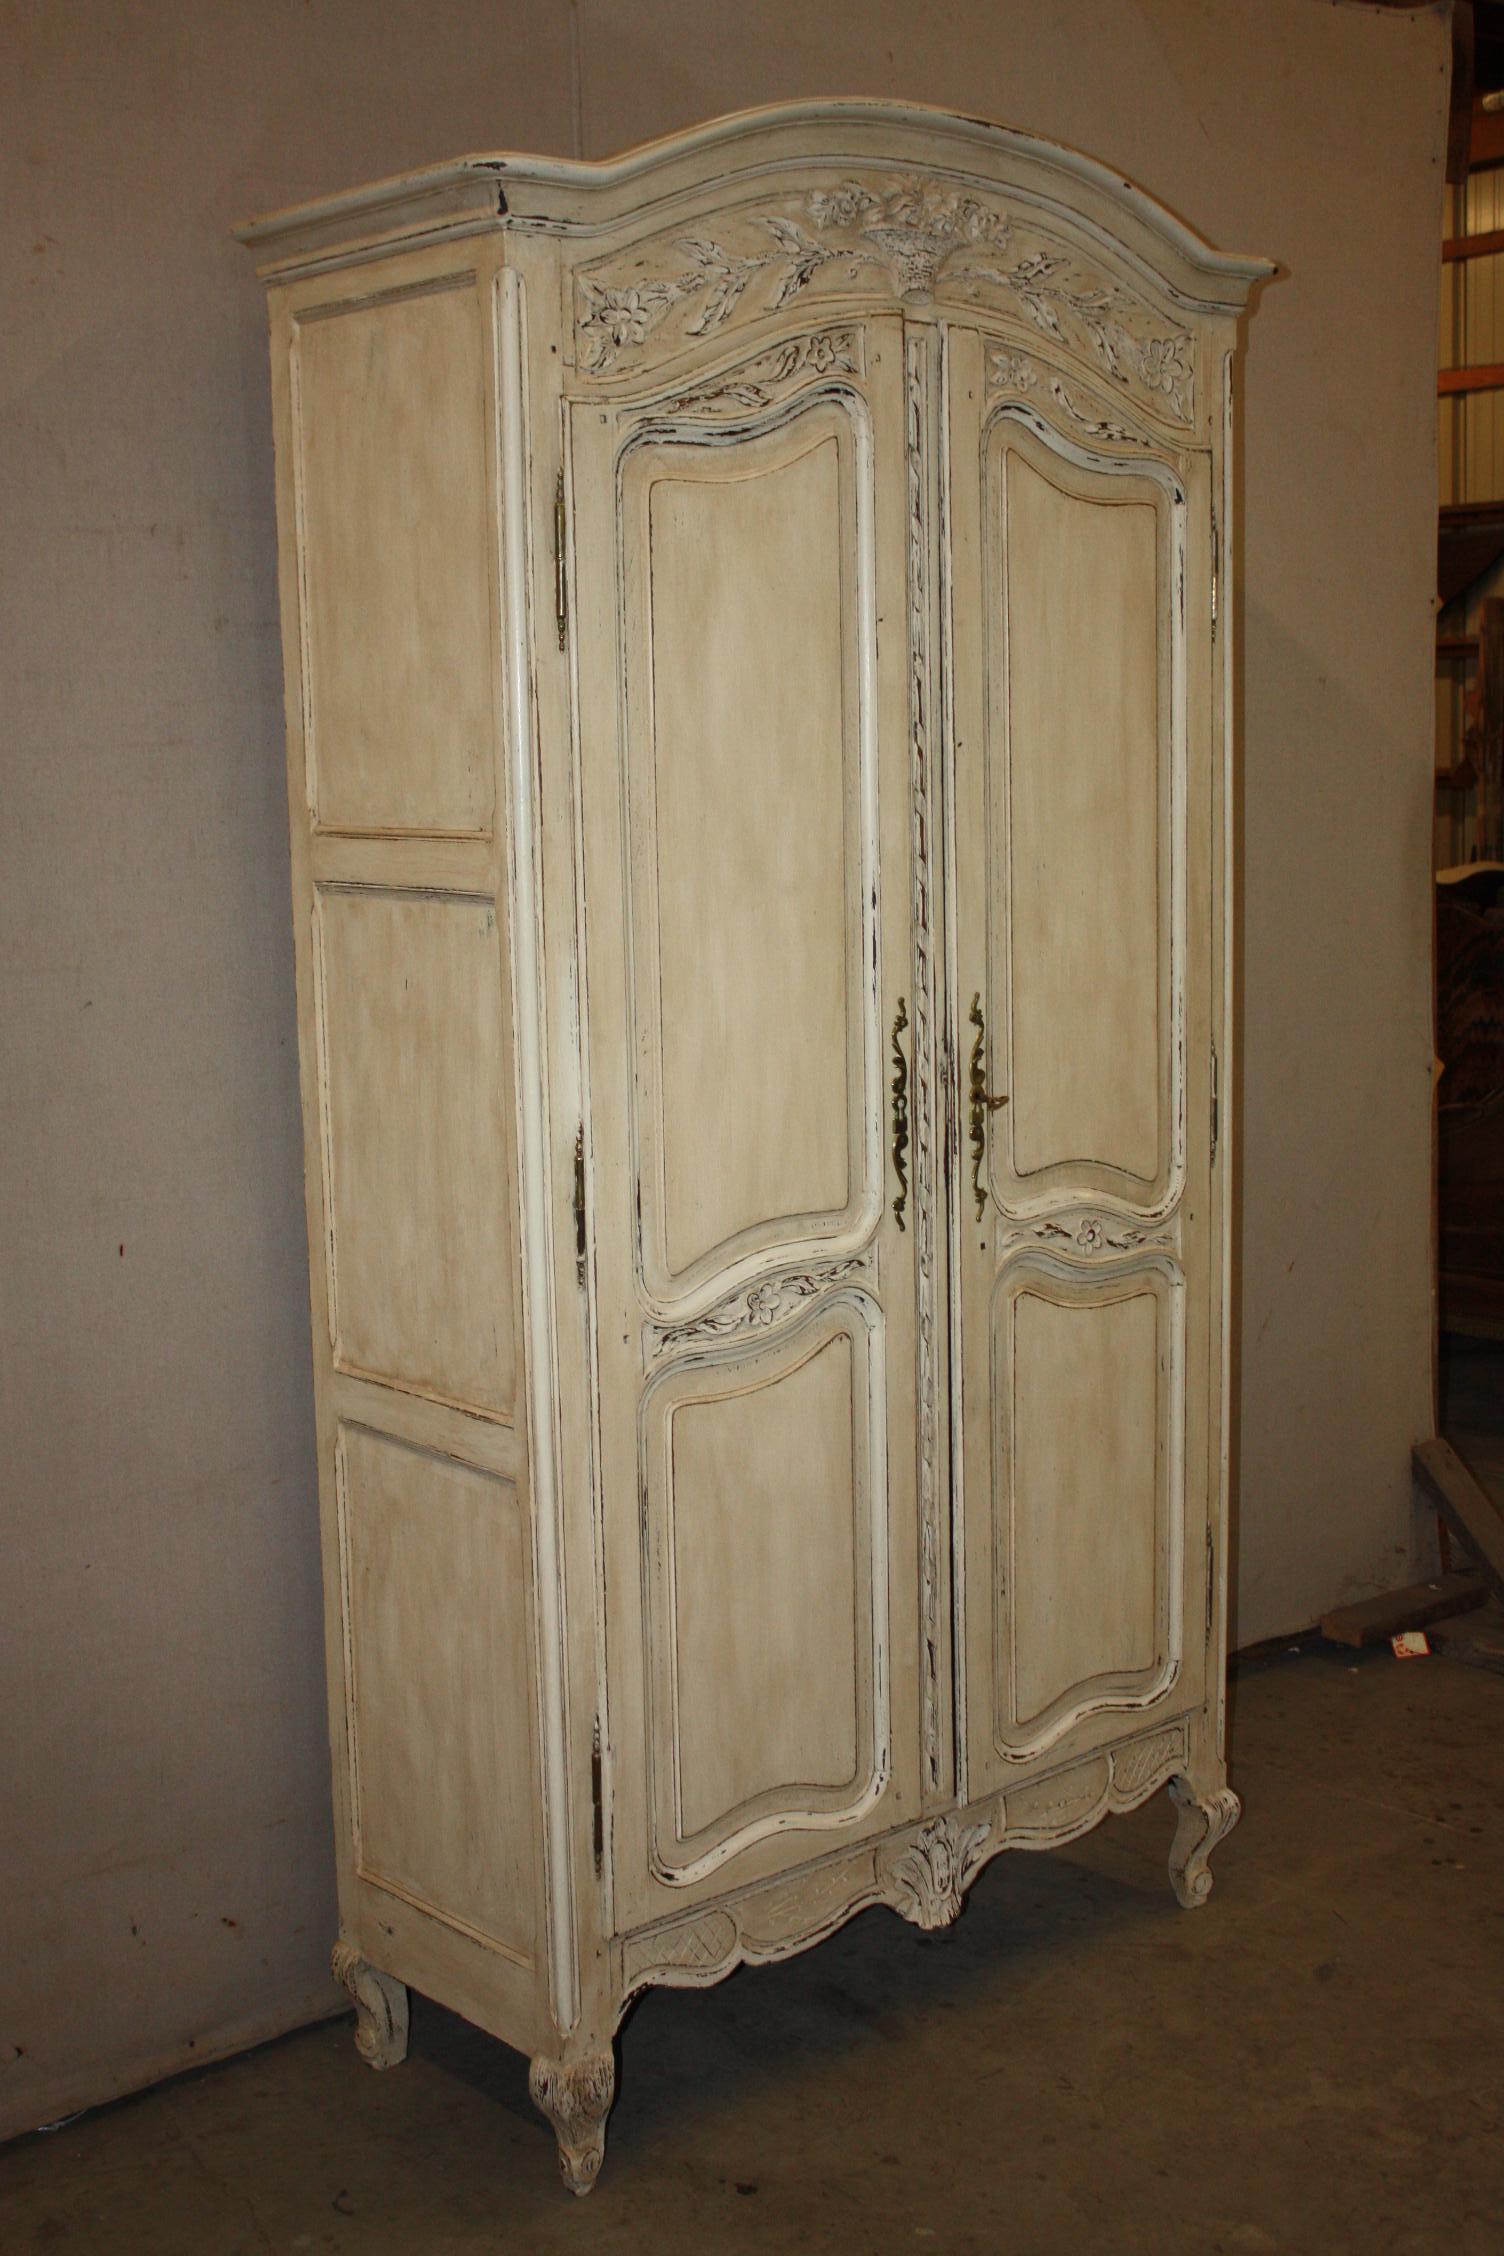 This is a very nice little painted French armoire that dates to the early 1900s. It is in great shape. It has three shelves that are each adjustable.